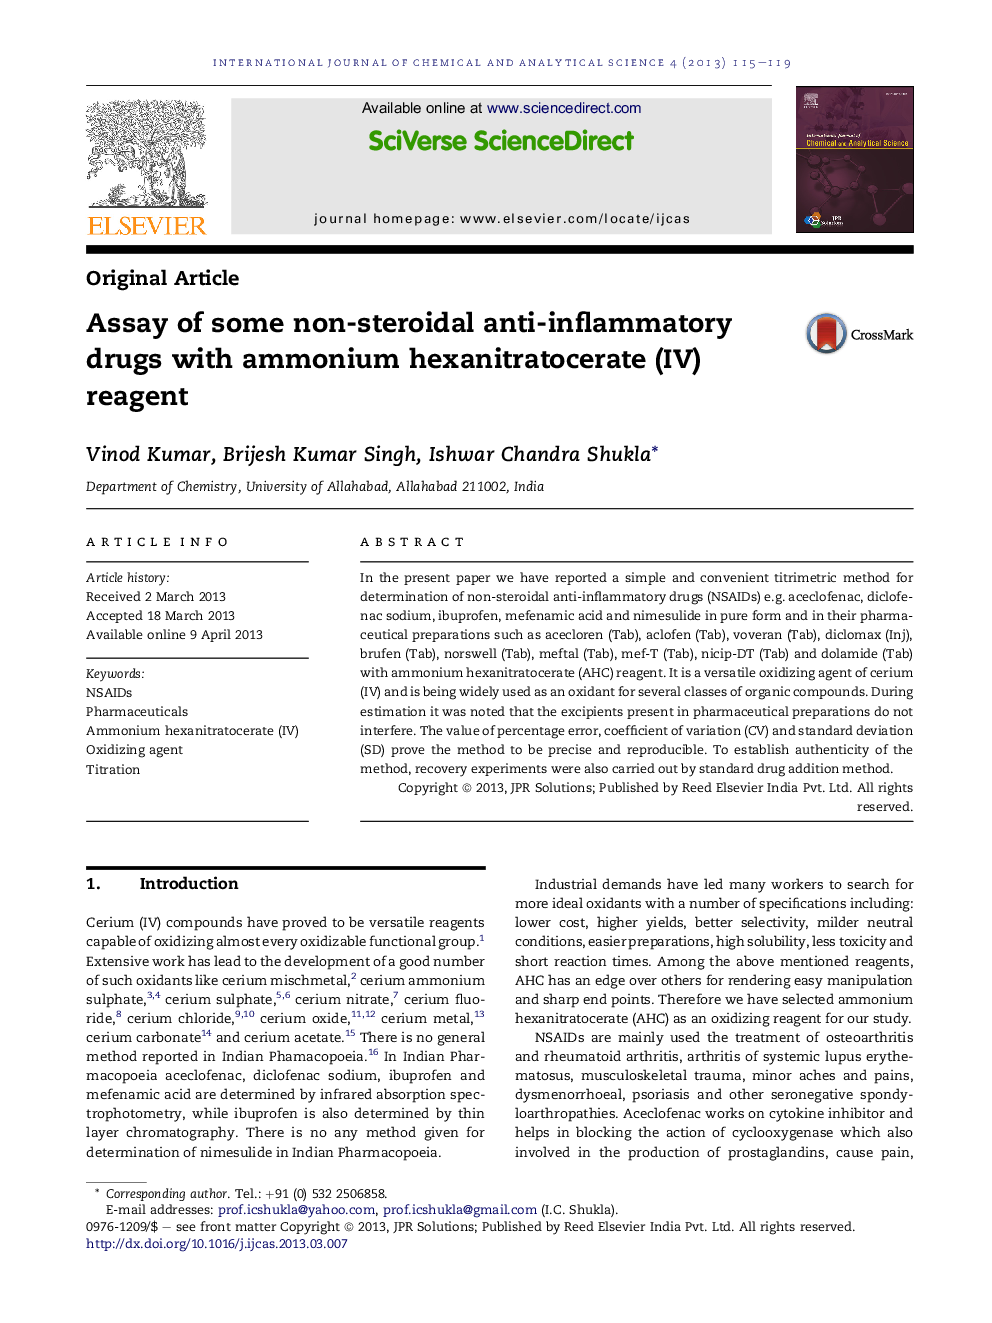 Assay of some non-steroidal anti-inflammatory drugs with ammonium hexanitratocerate (IV) reagent